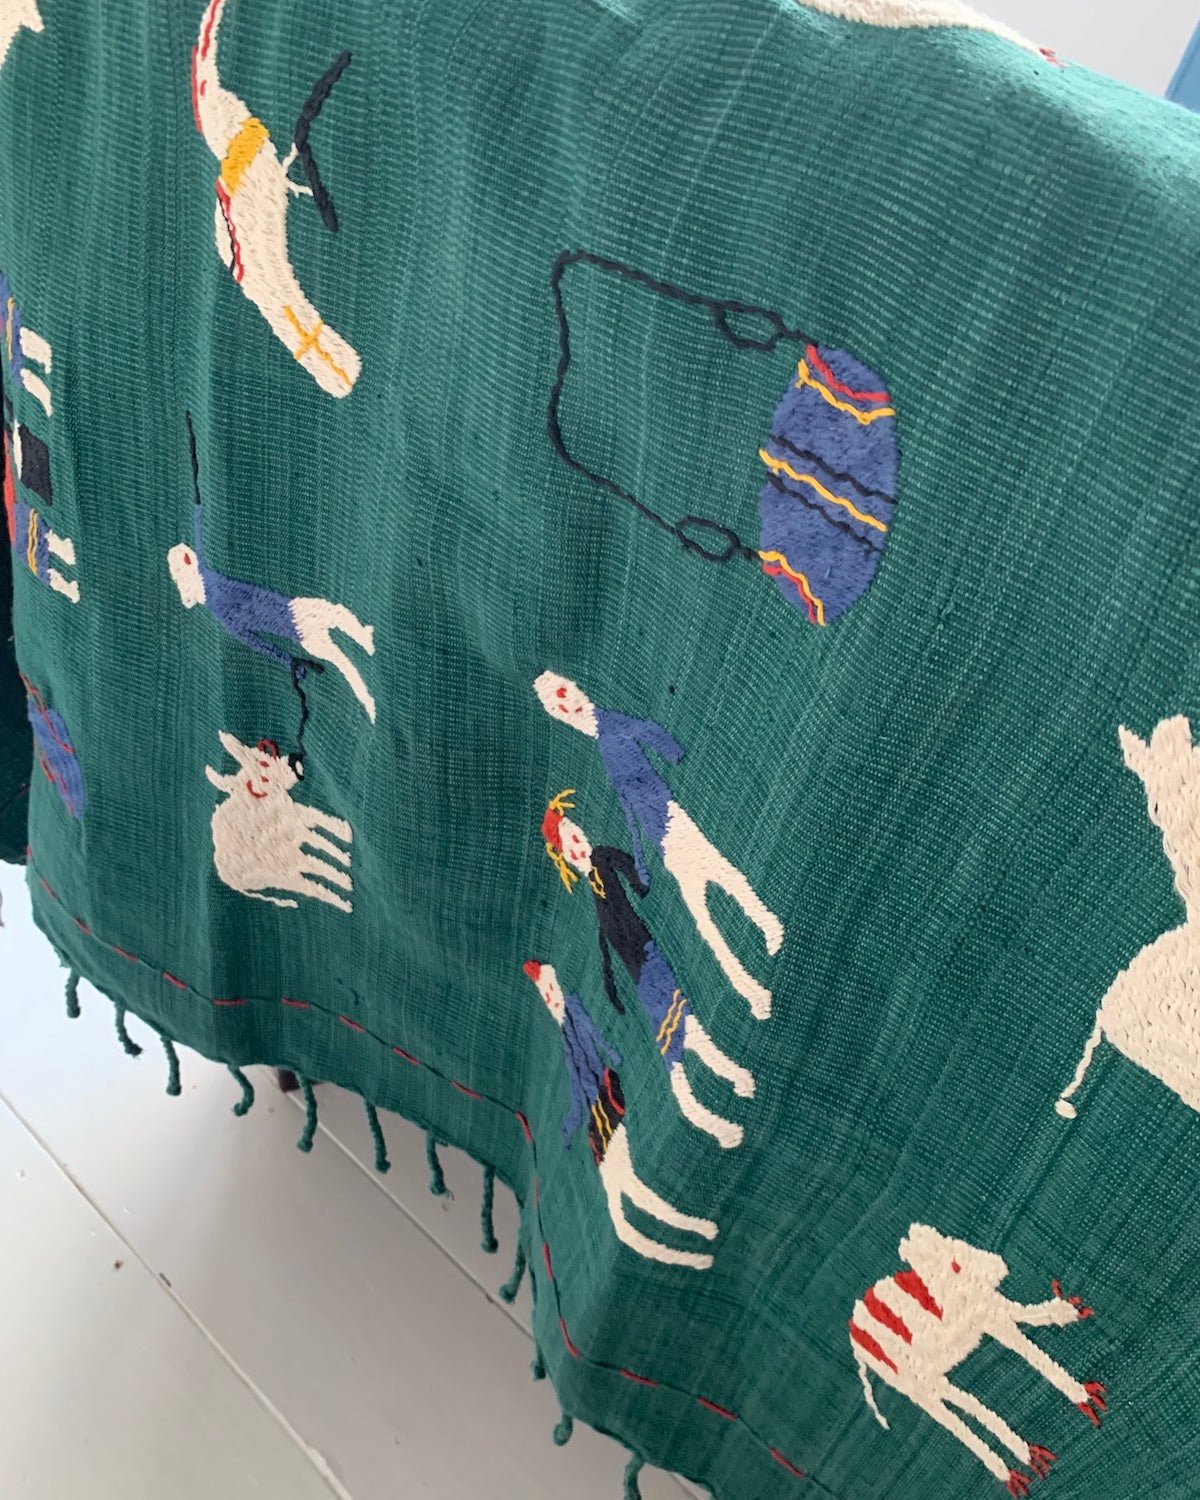 Green Embroidered Throw, Burmese Blanket | Chin State Textile | Artisan-made Blanket - YGN Collective